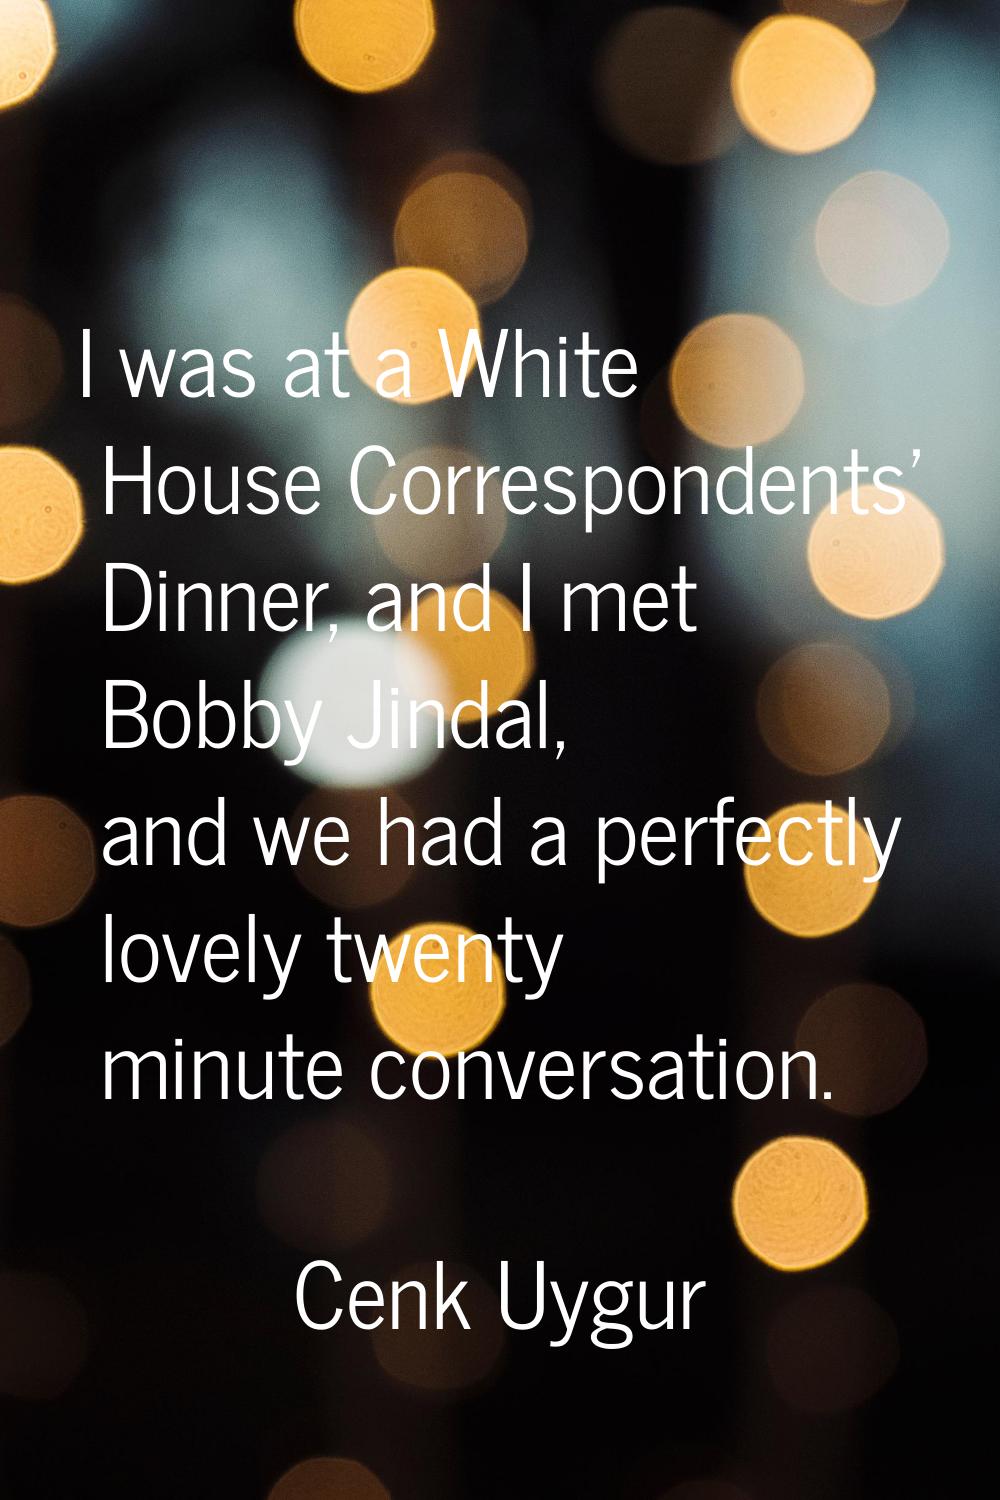 I was at a White House Correspondents' Dinner, and I met Bobby Jindal, and we had a perfectly lovel